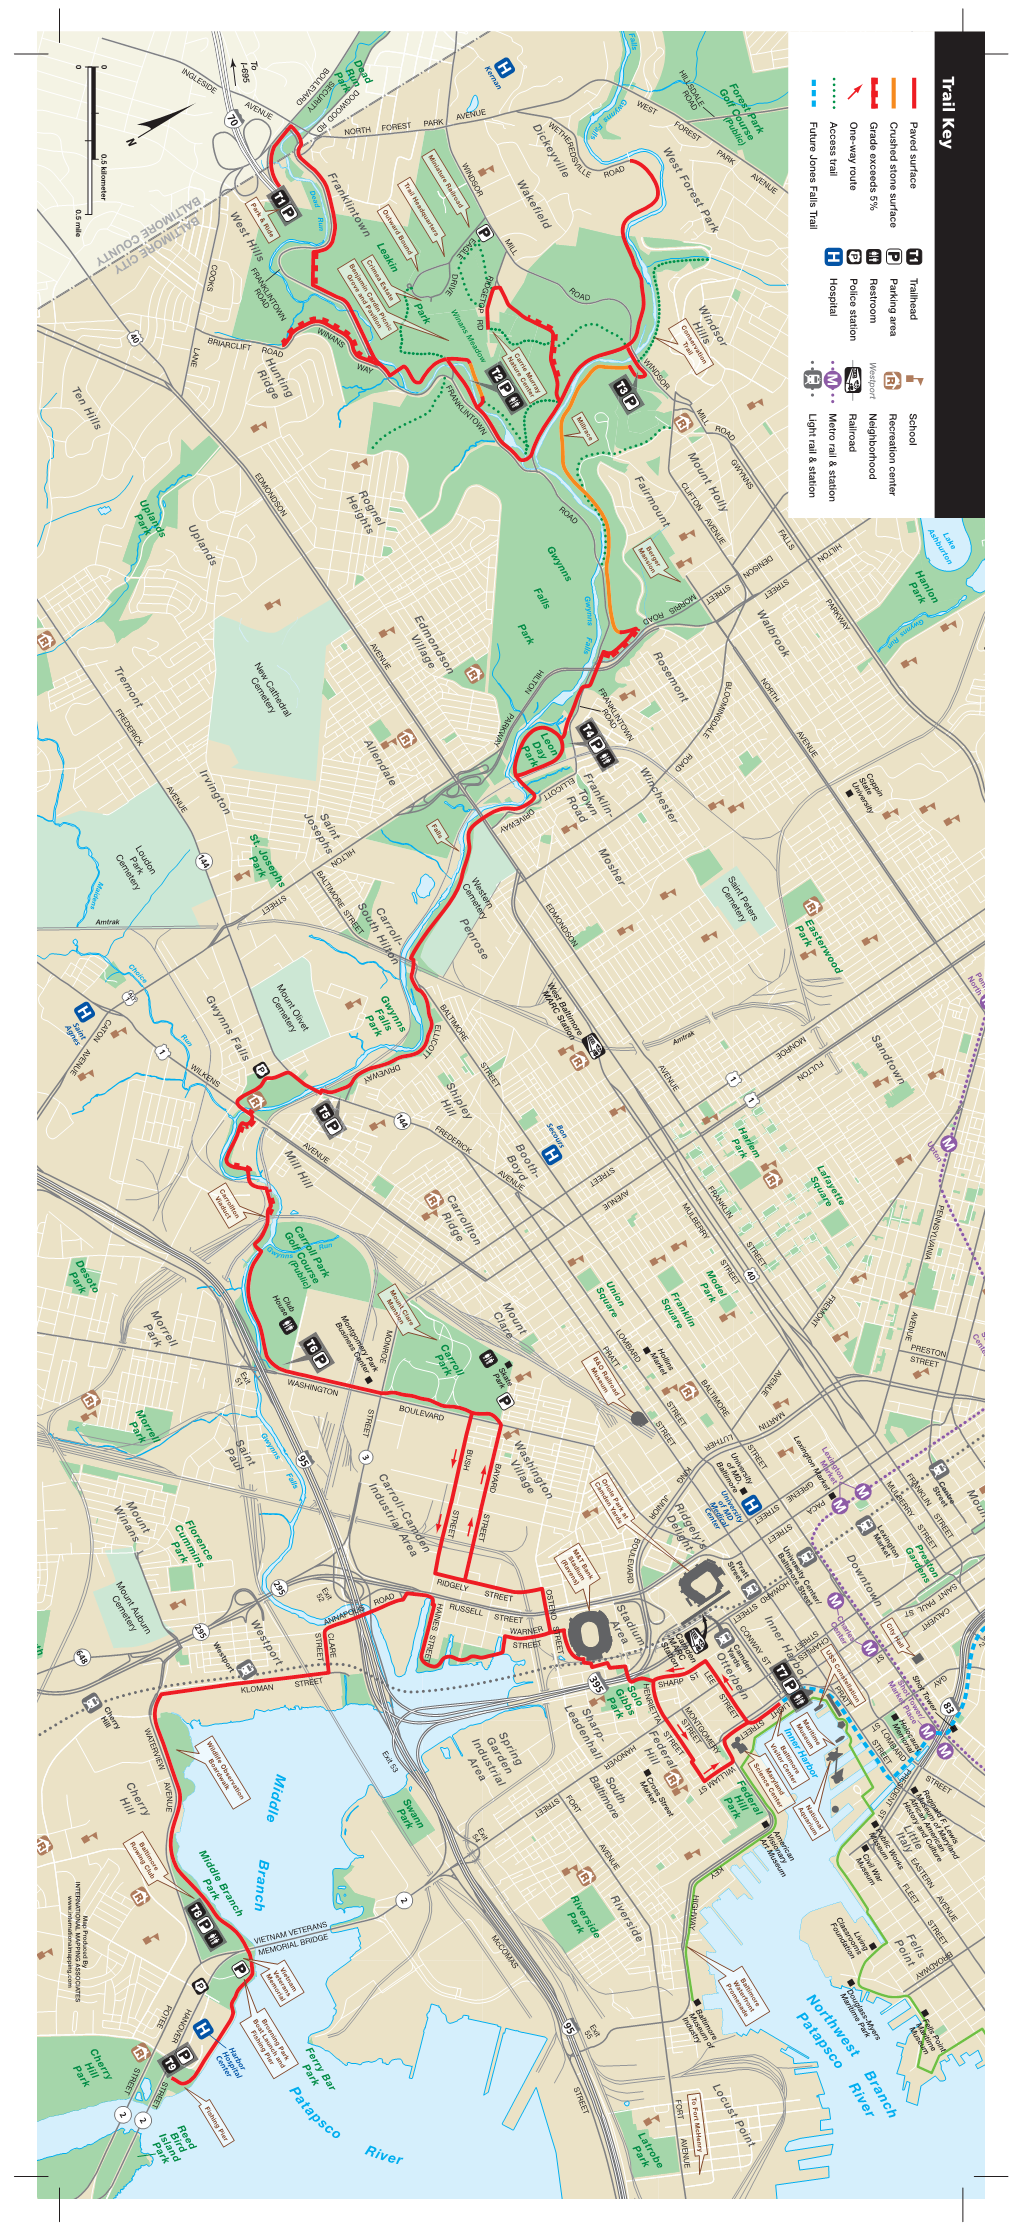 Trail Access Trail One-Way Route Grade Exceeds 5% Crushed Stone Surface Paved Surface F